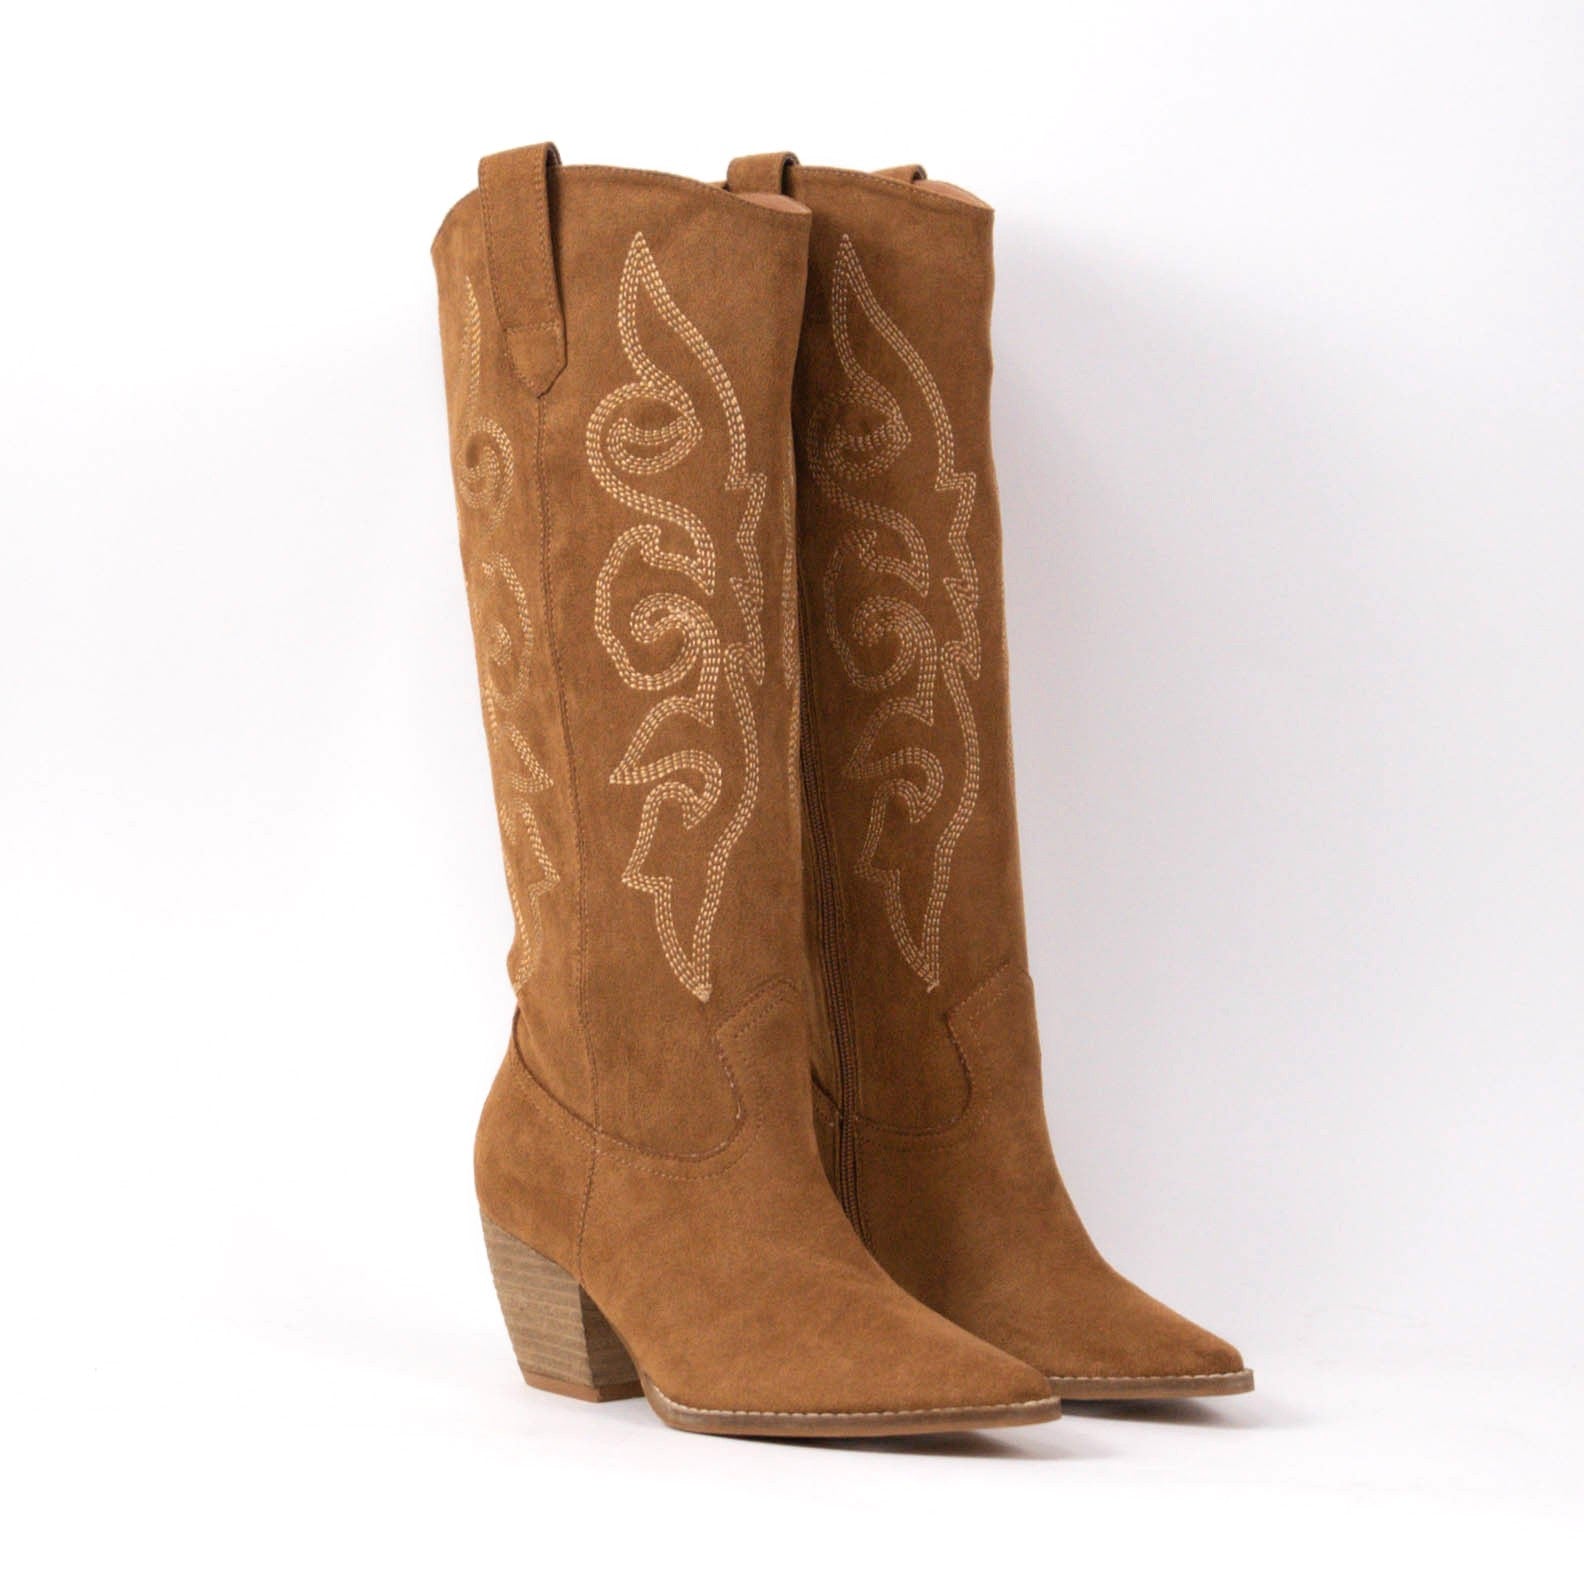 One Day Western Suede Boots